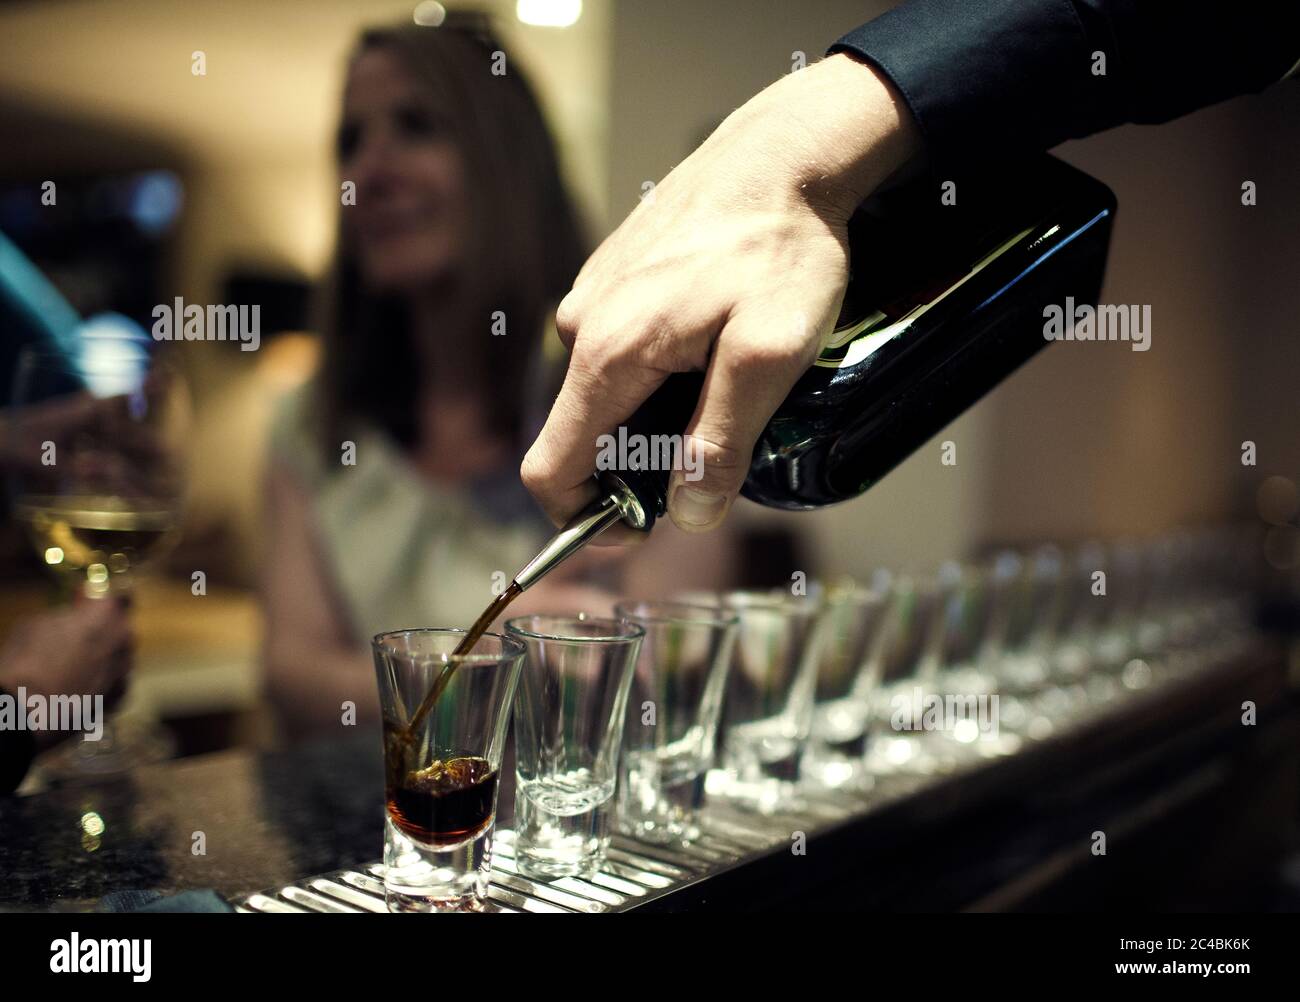 https://c8.alamy.com/comp/2C4BK6K/close-up-of-bartender-pouring-drinks-from-bottle-into-a-row-of-shot-glasses-standing-on-bar-counter-woman-sitting-in-background-2C4BK6K.jpg